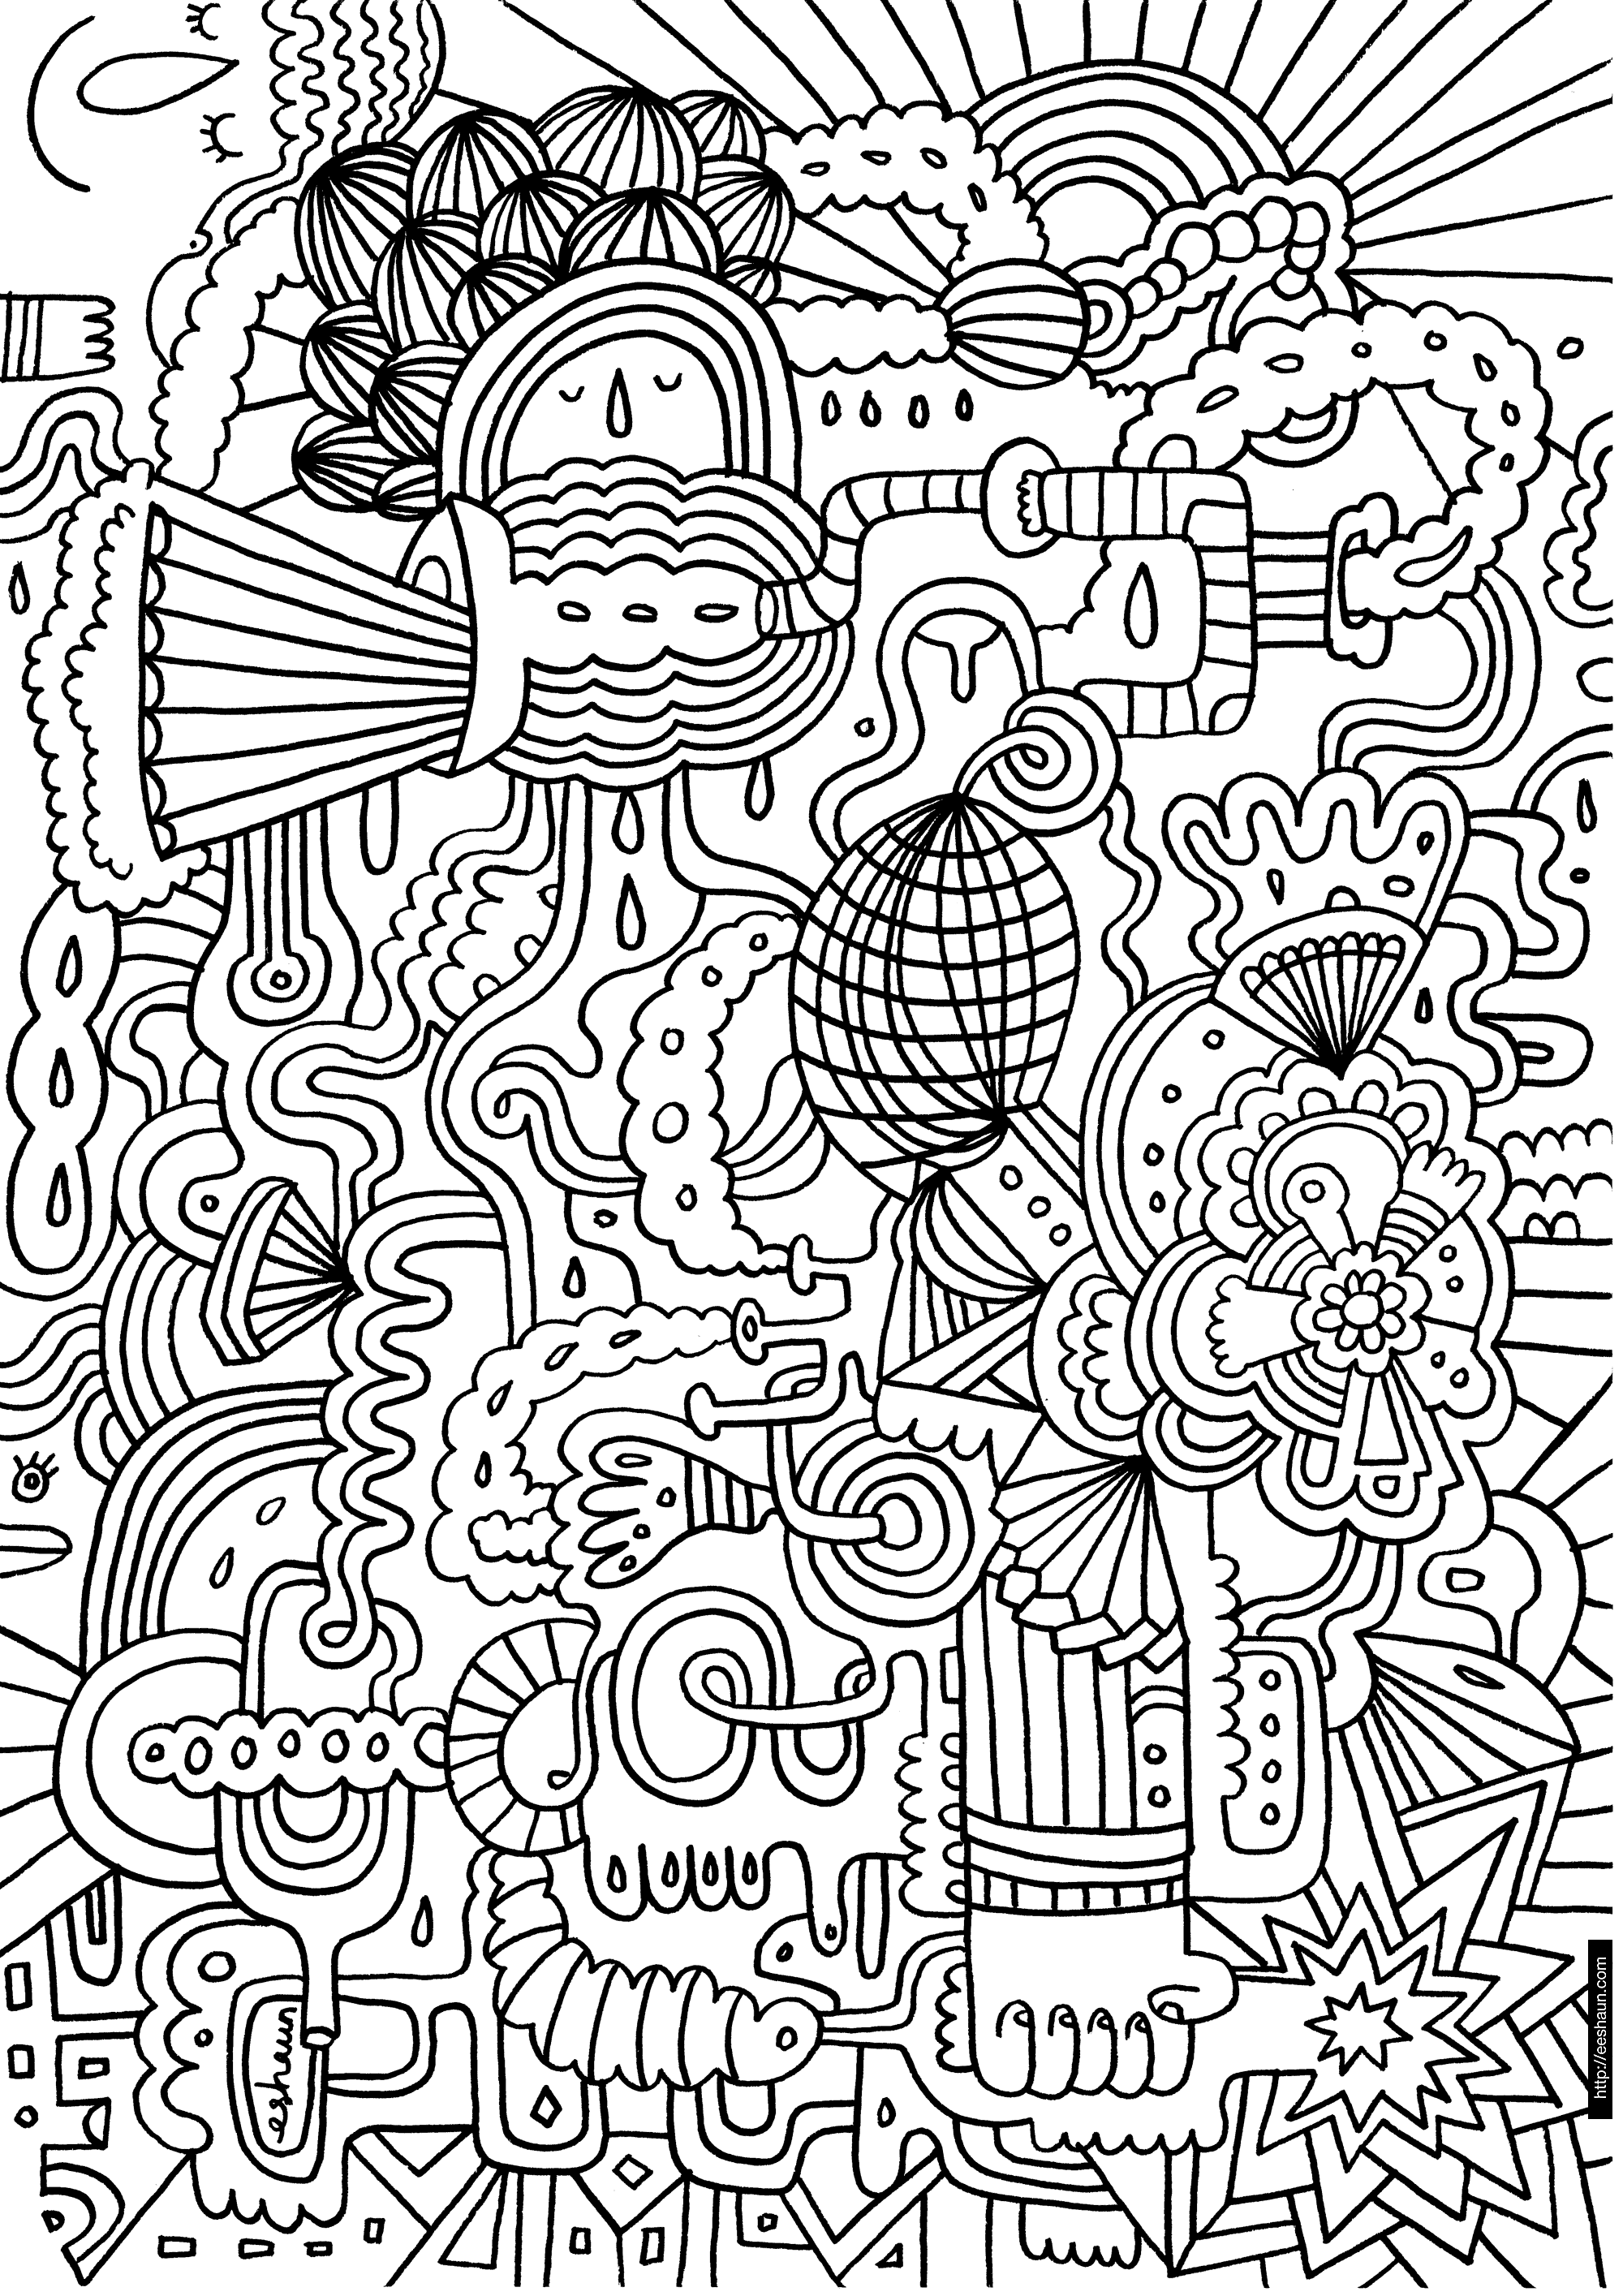 super hard coloring pages - High Quality Coloring Pages